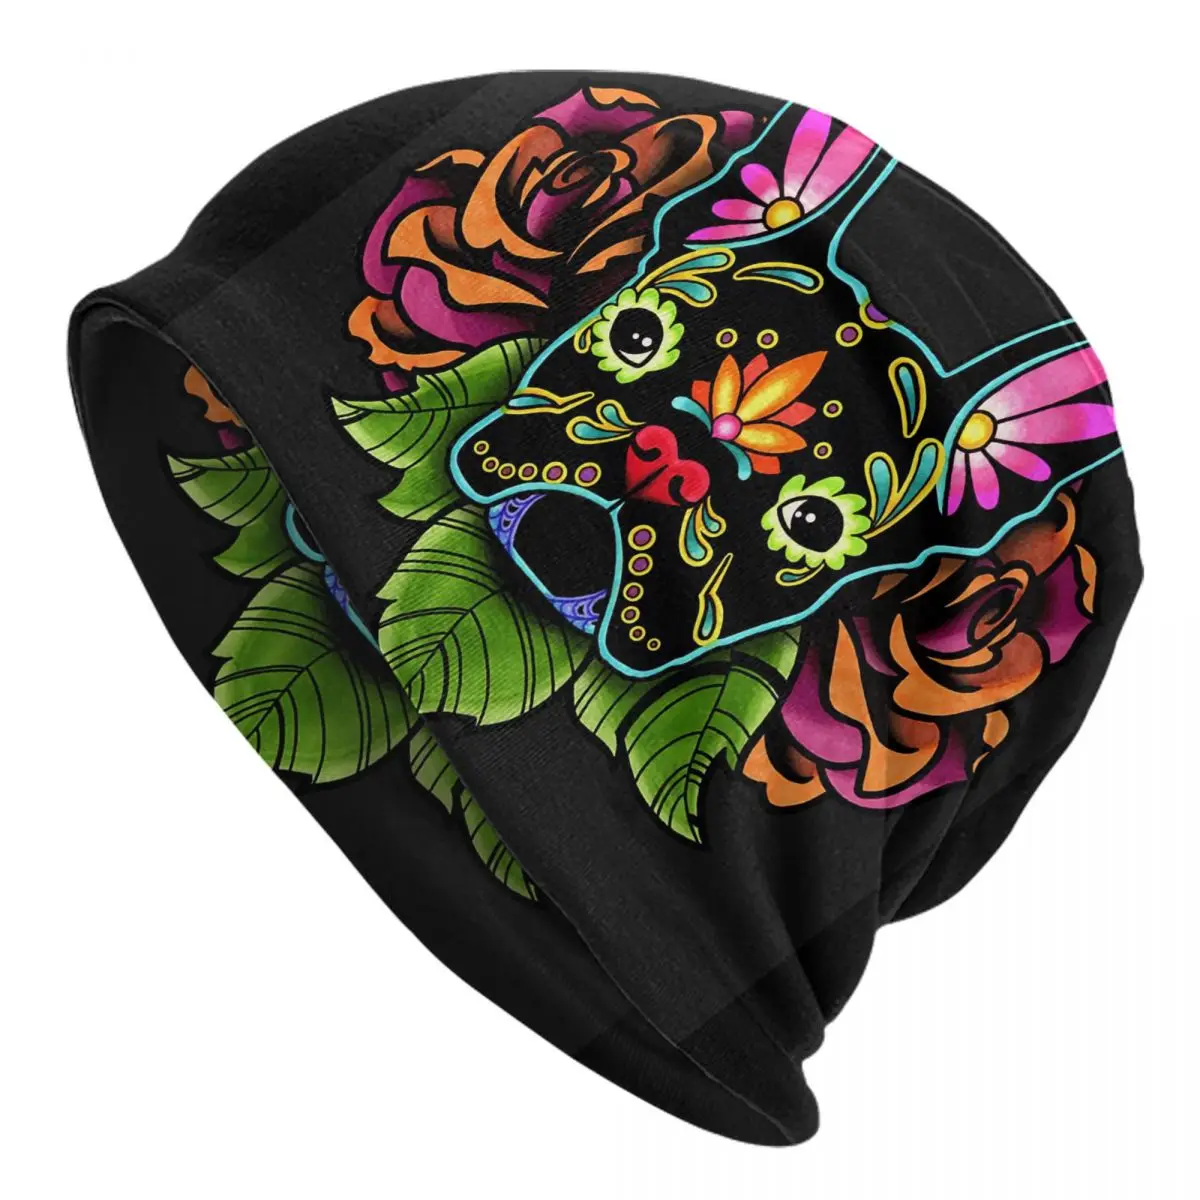 Day Of The Dead French Bulldog In Black Sugar Skull Dog Adult Men's Women's Knit Hat Keep warm winter Funny knitted hat